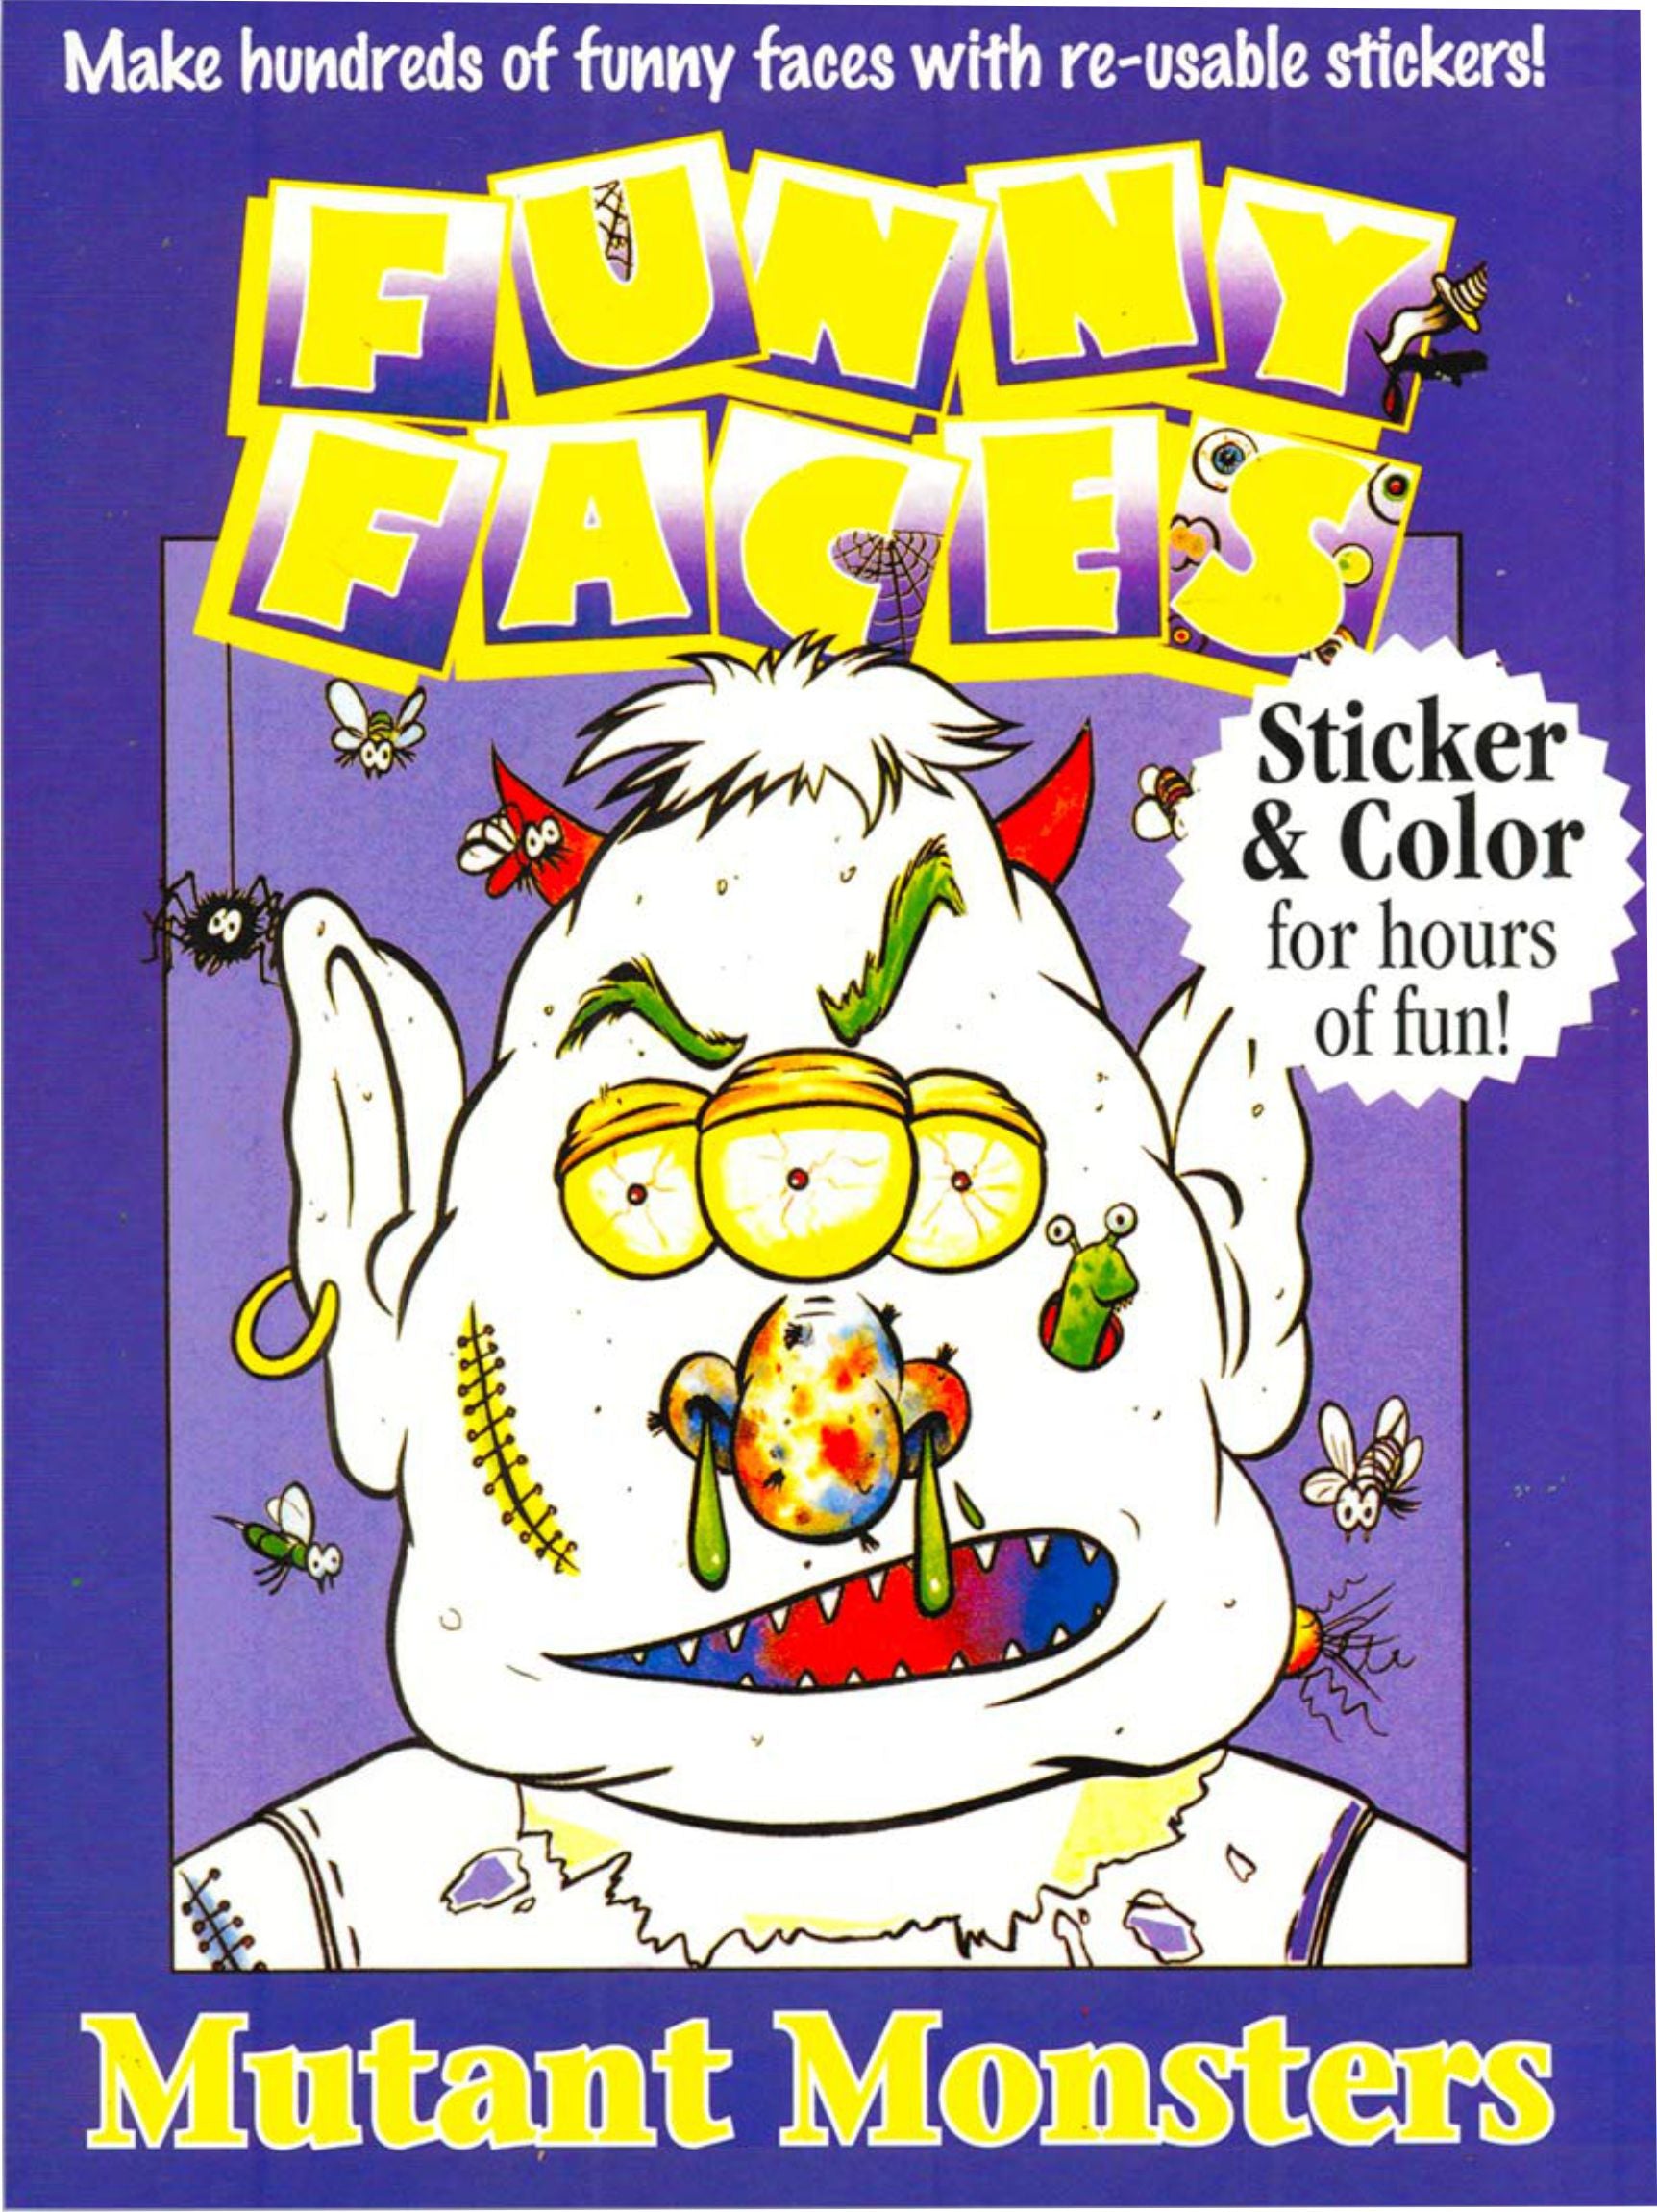 Funny Scary Monster Faces Make a Face Sticker Books